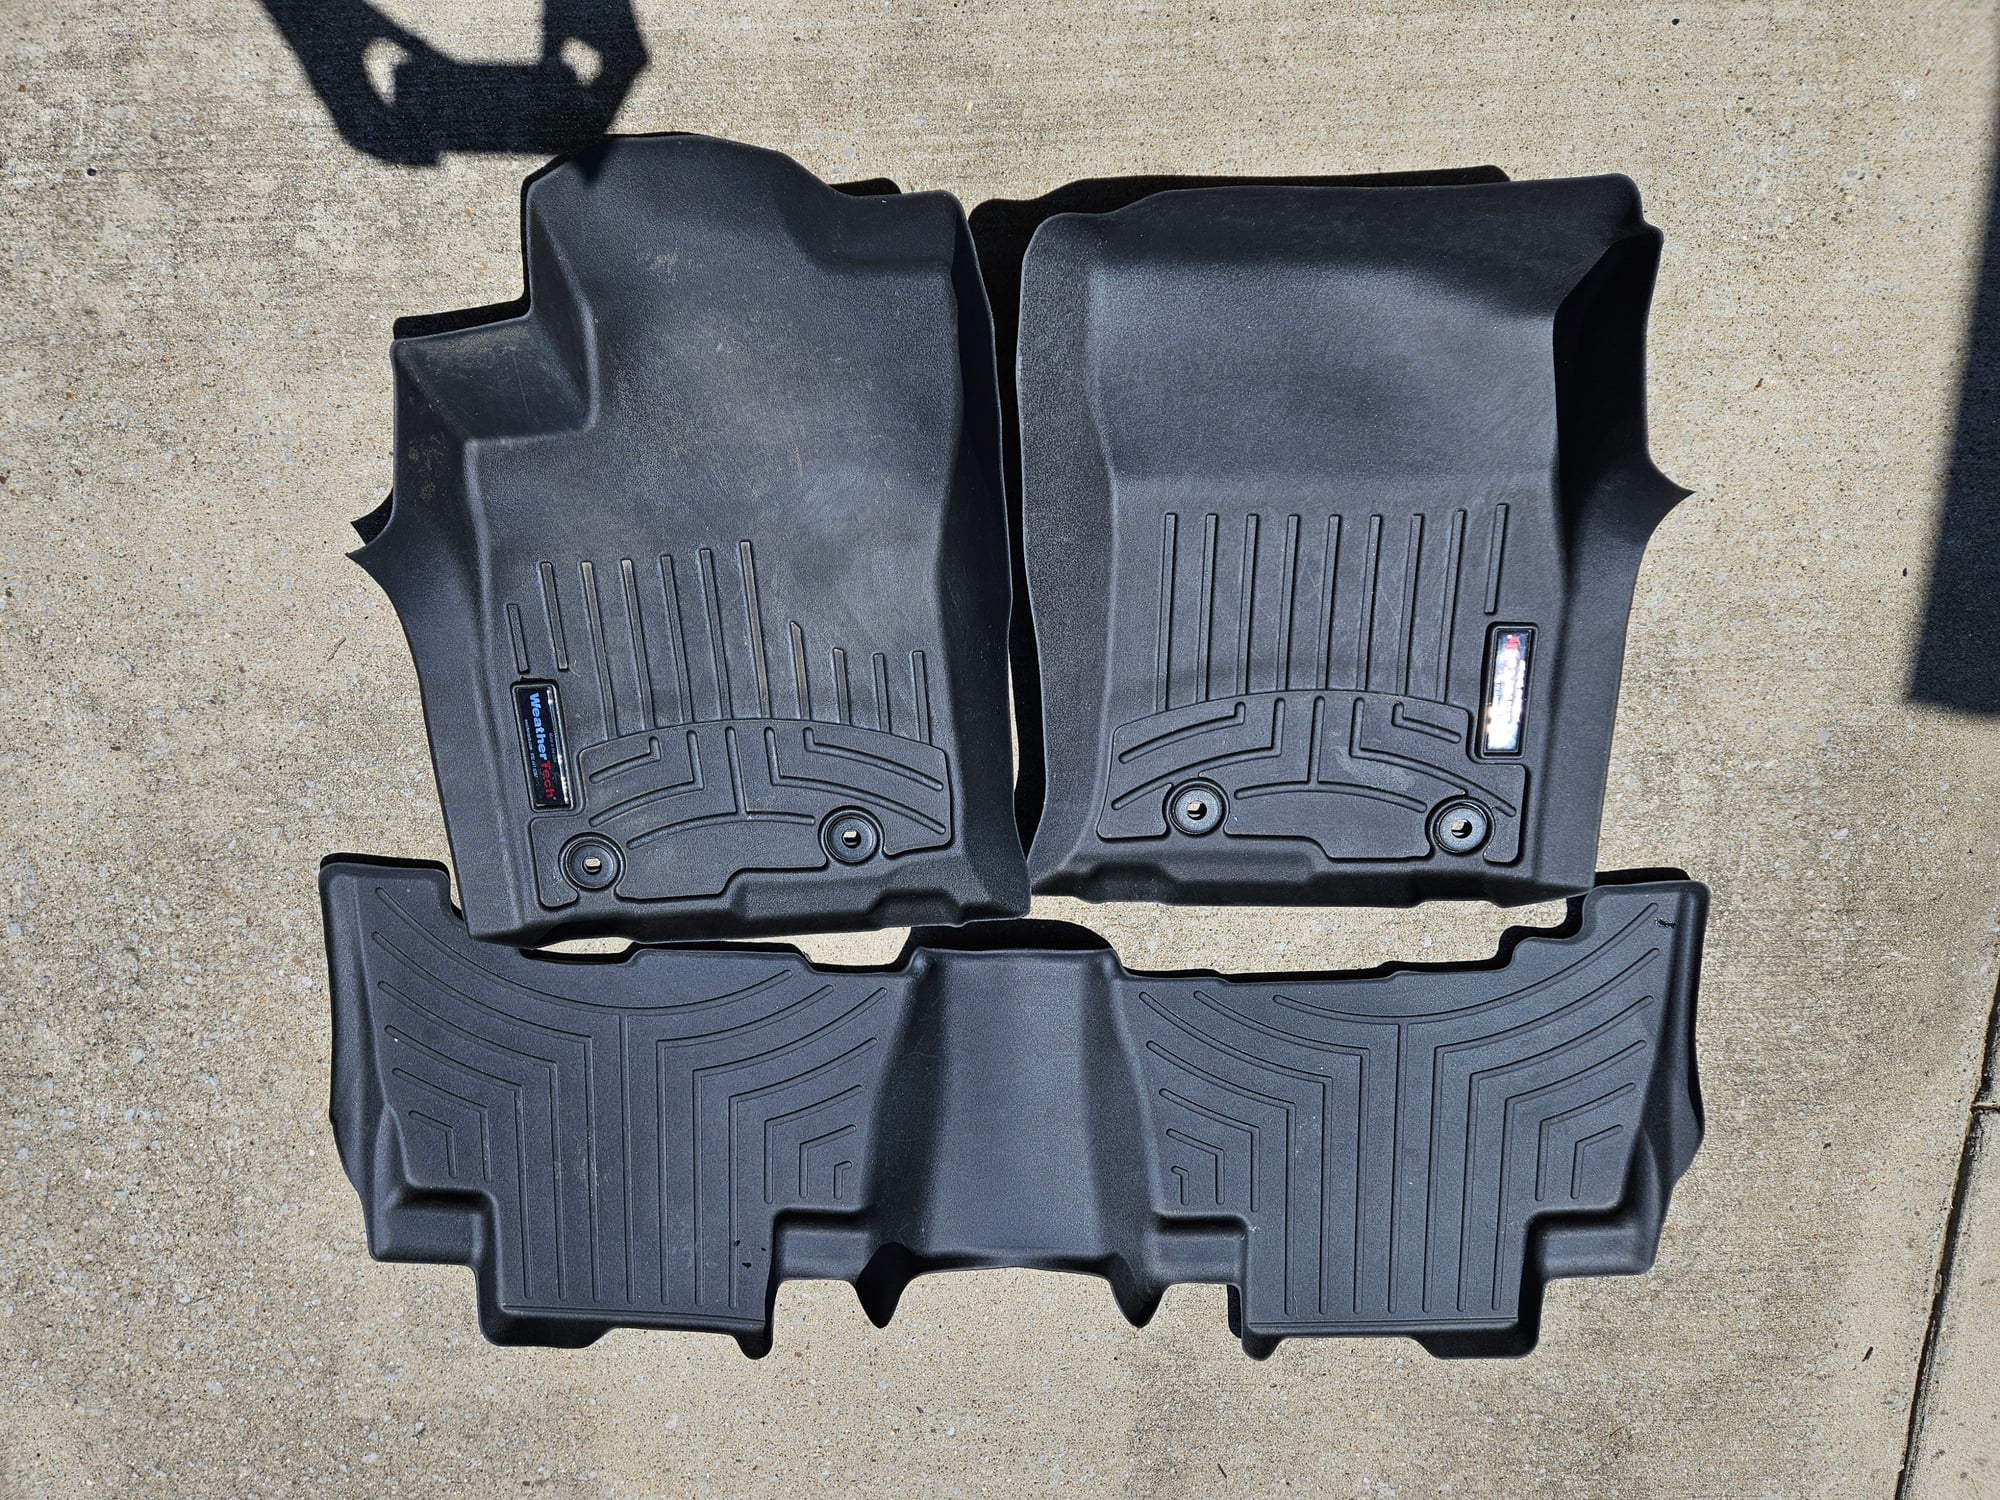 Miscellaneous - WeatherTech GX 460 floor liners - Used - Antioch, TN 37013, United States